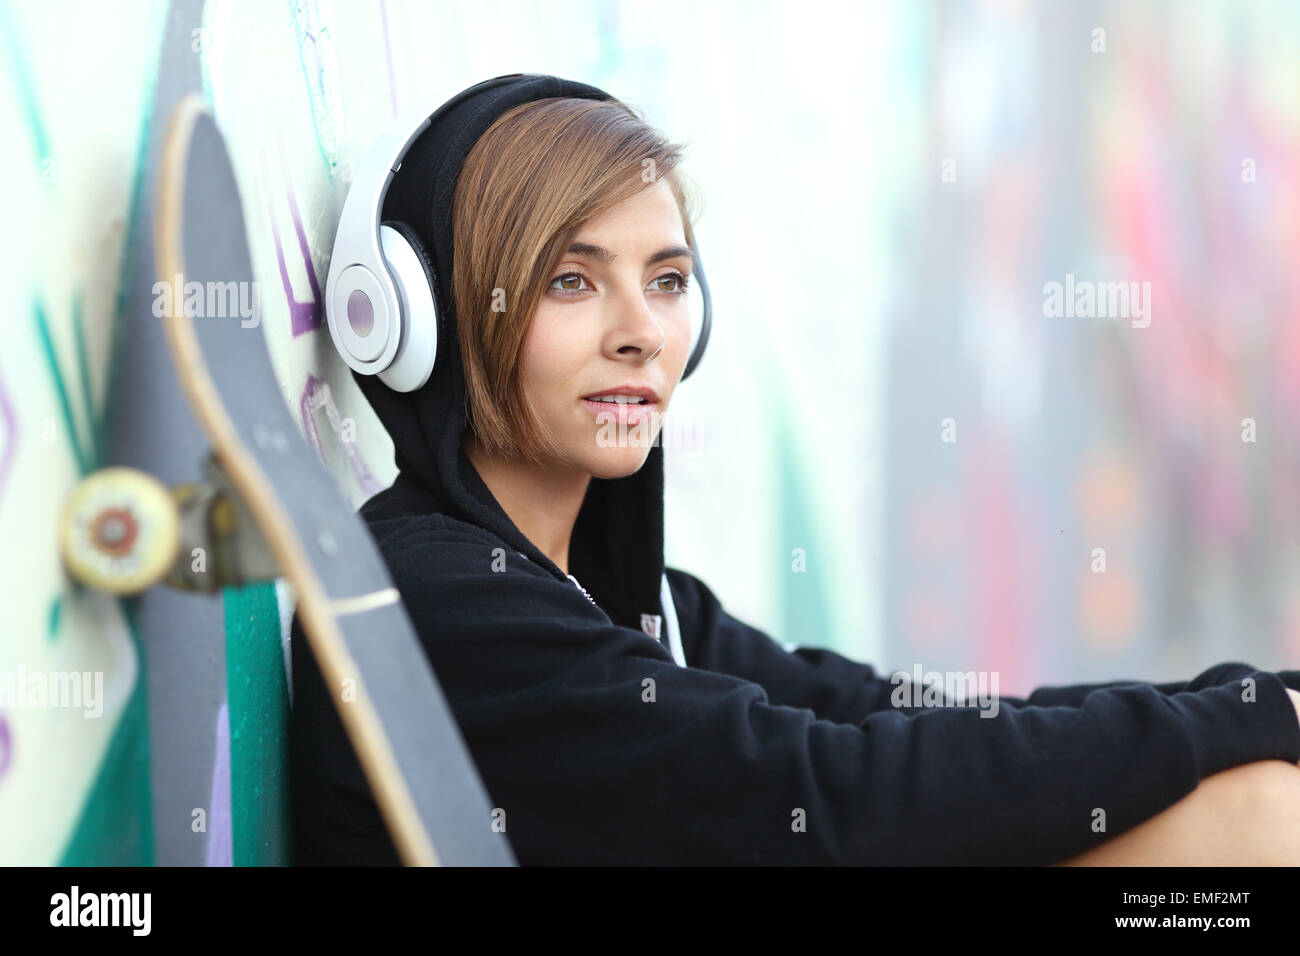 Young skater girl listening to the music with headphones with a blurred graffiti wall in the background Stock Photo